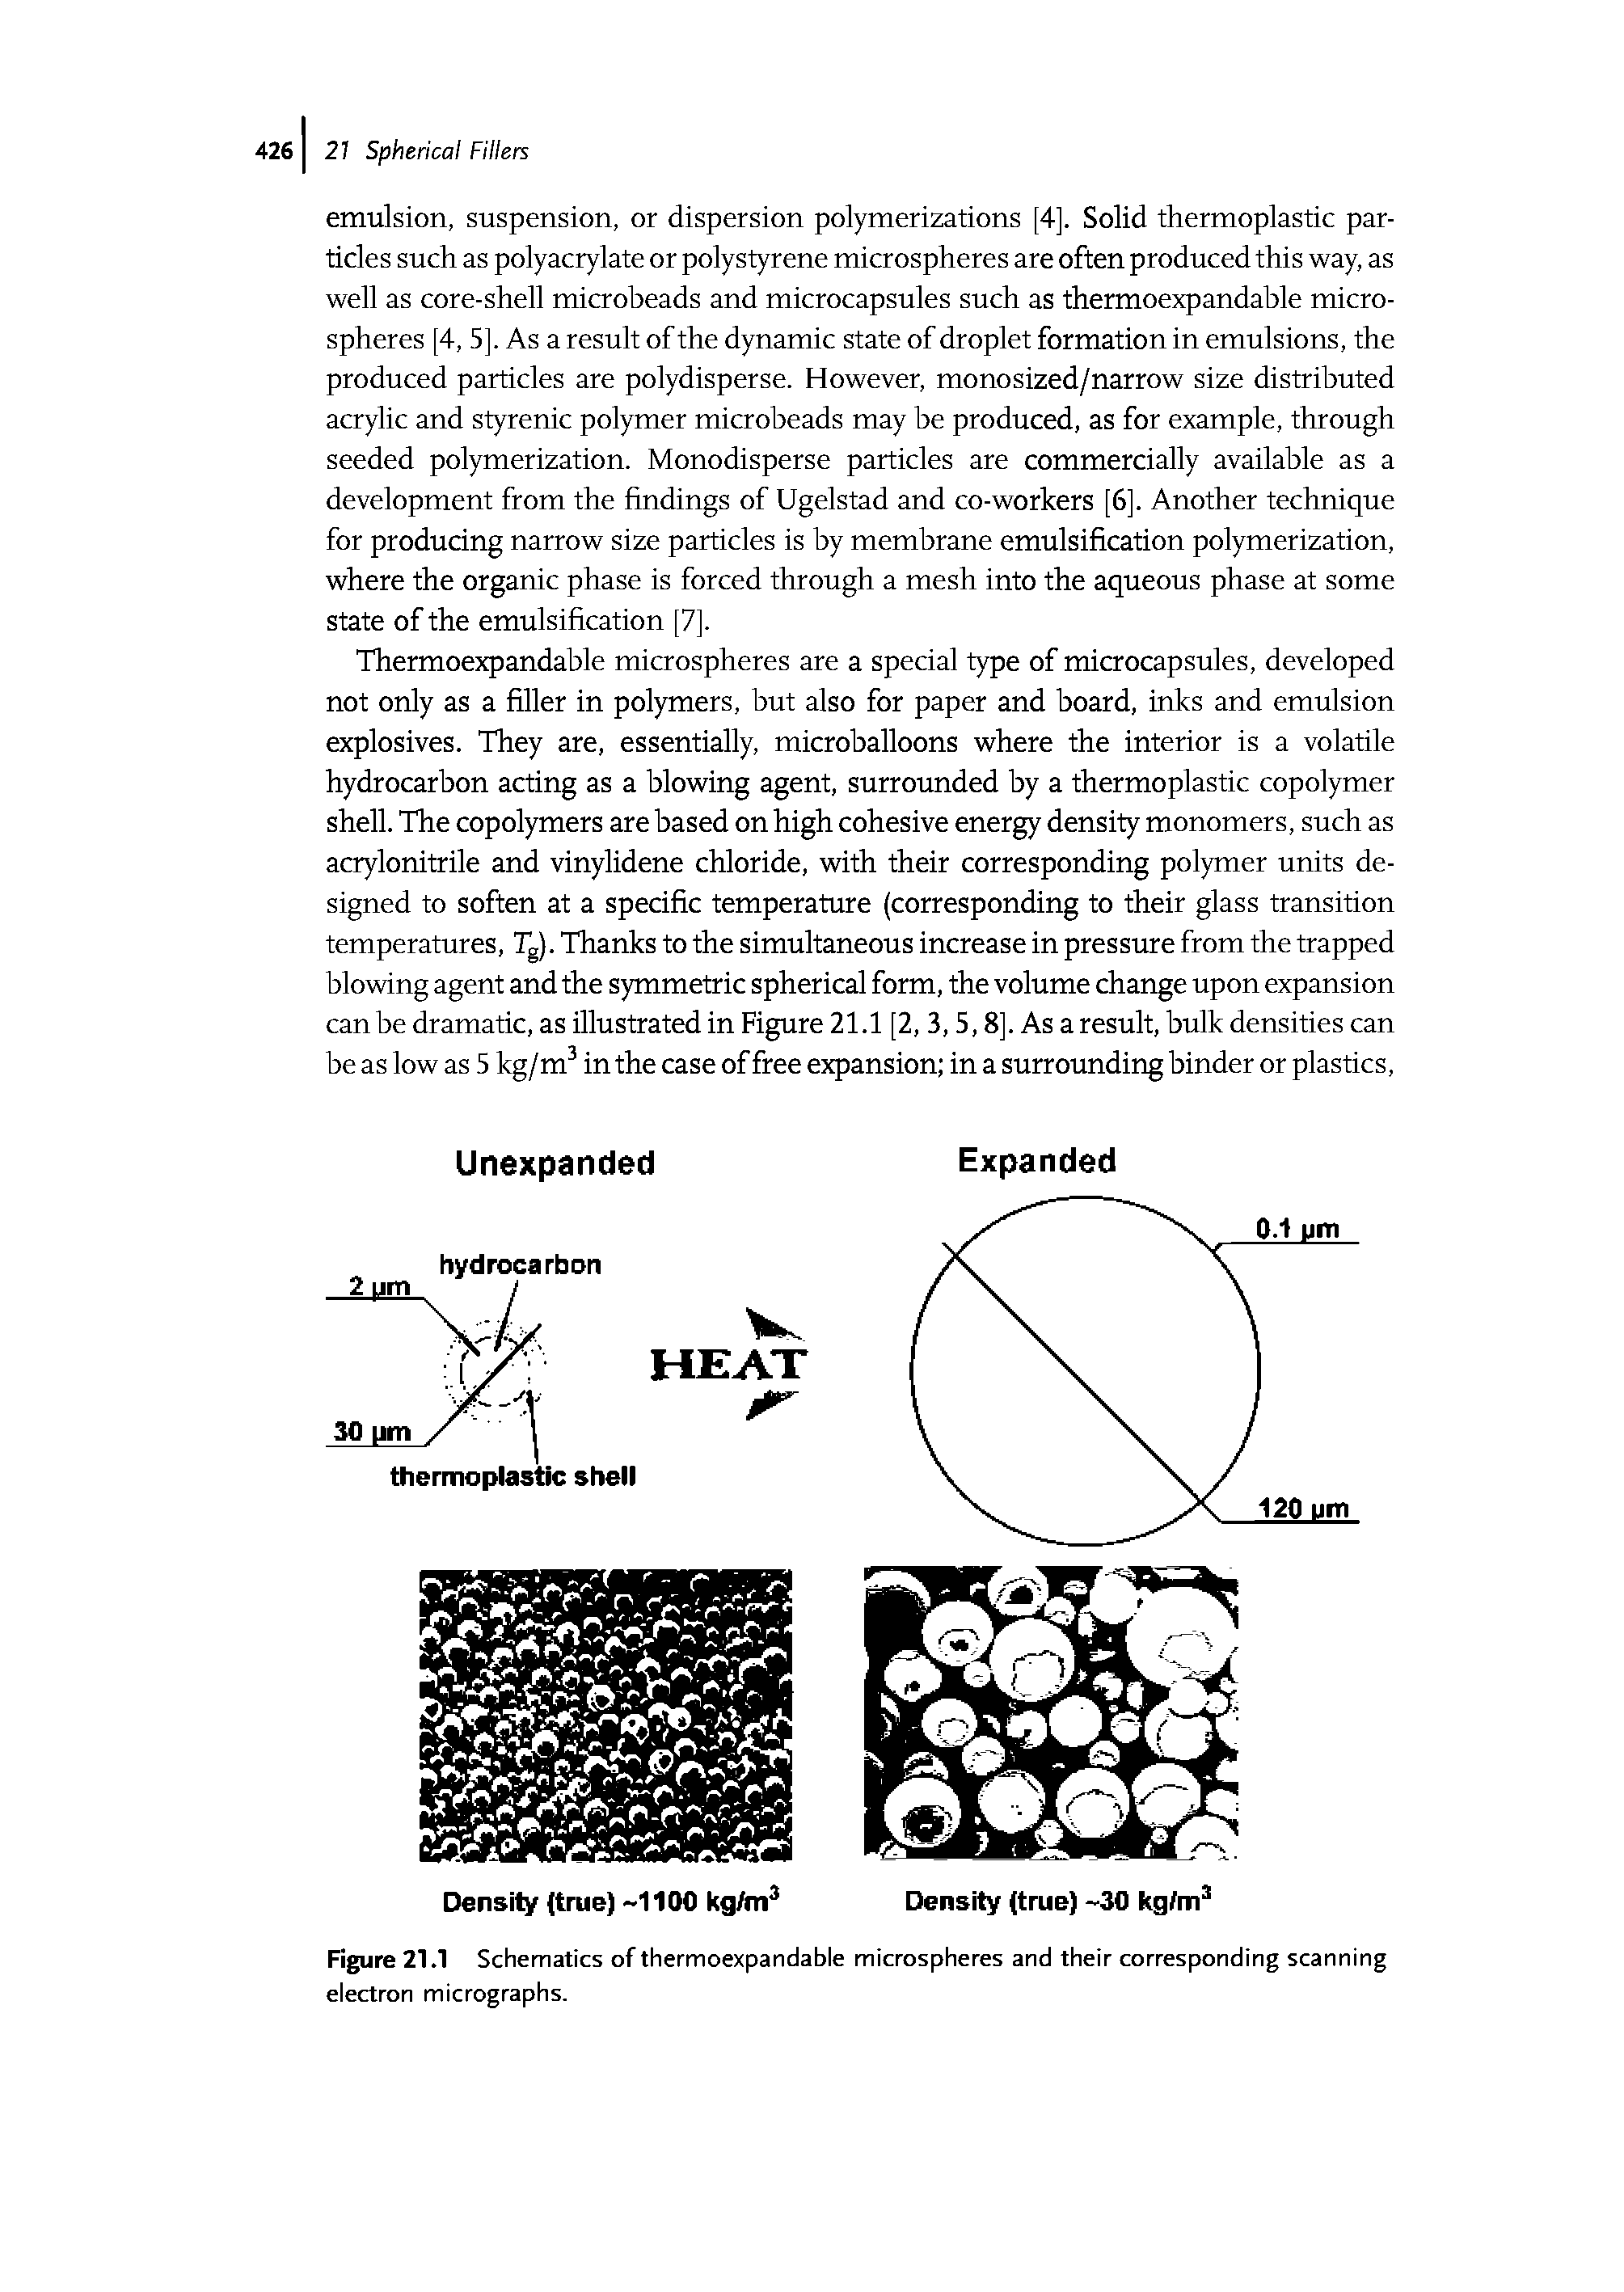 Figure 21.1 Schematics of thermoexpandable microspheres and their corresponding scanning electron micrographs.